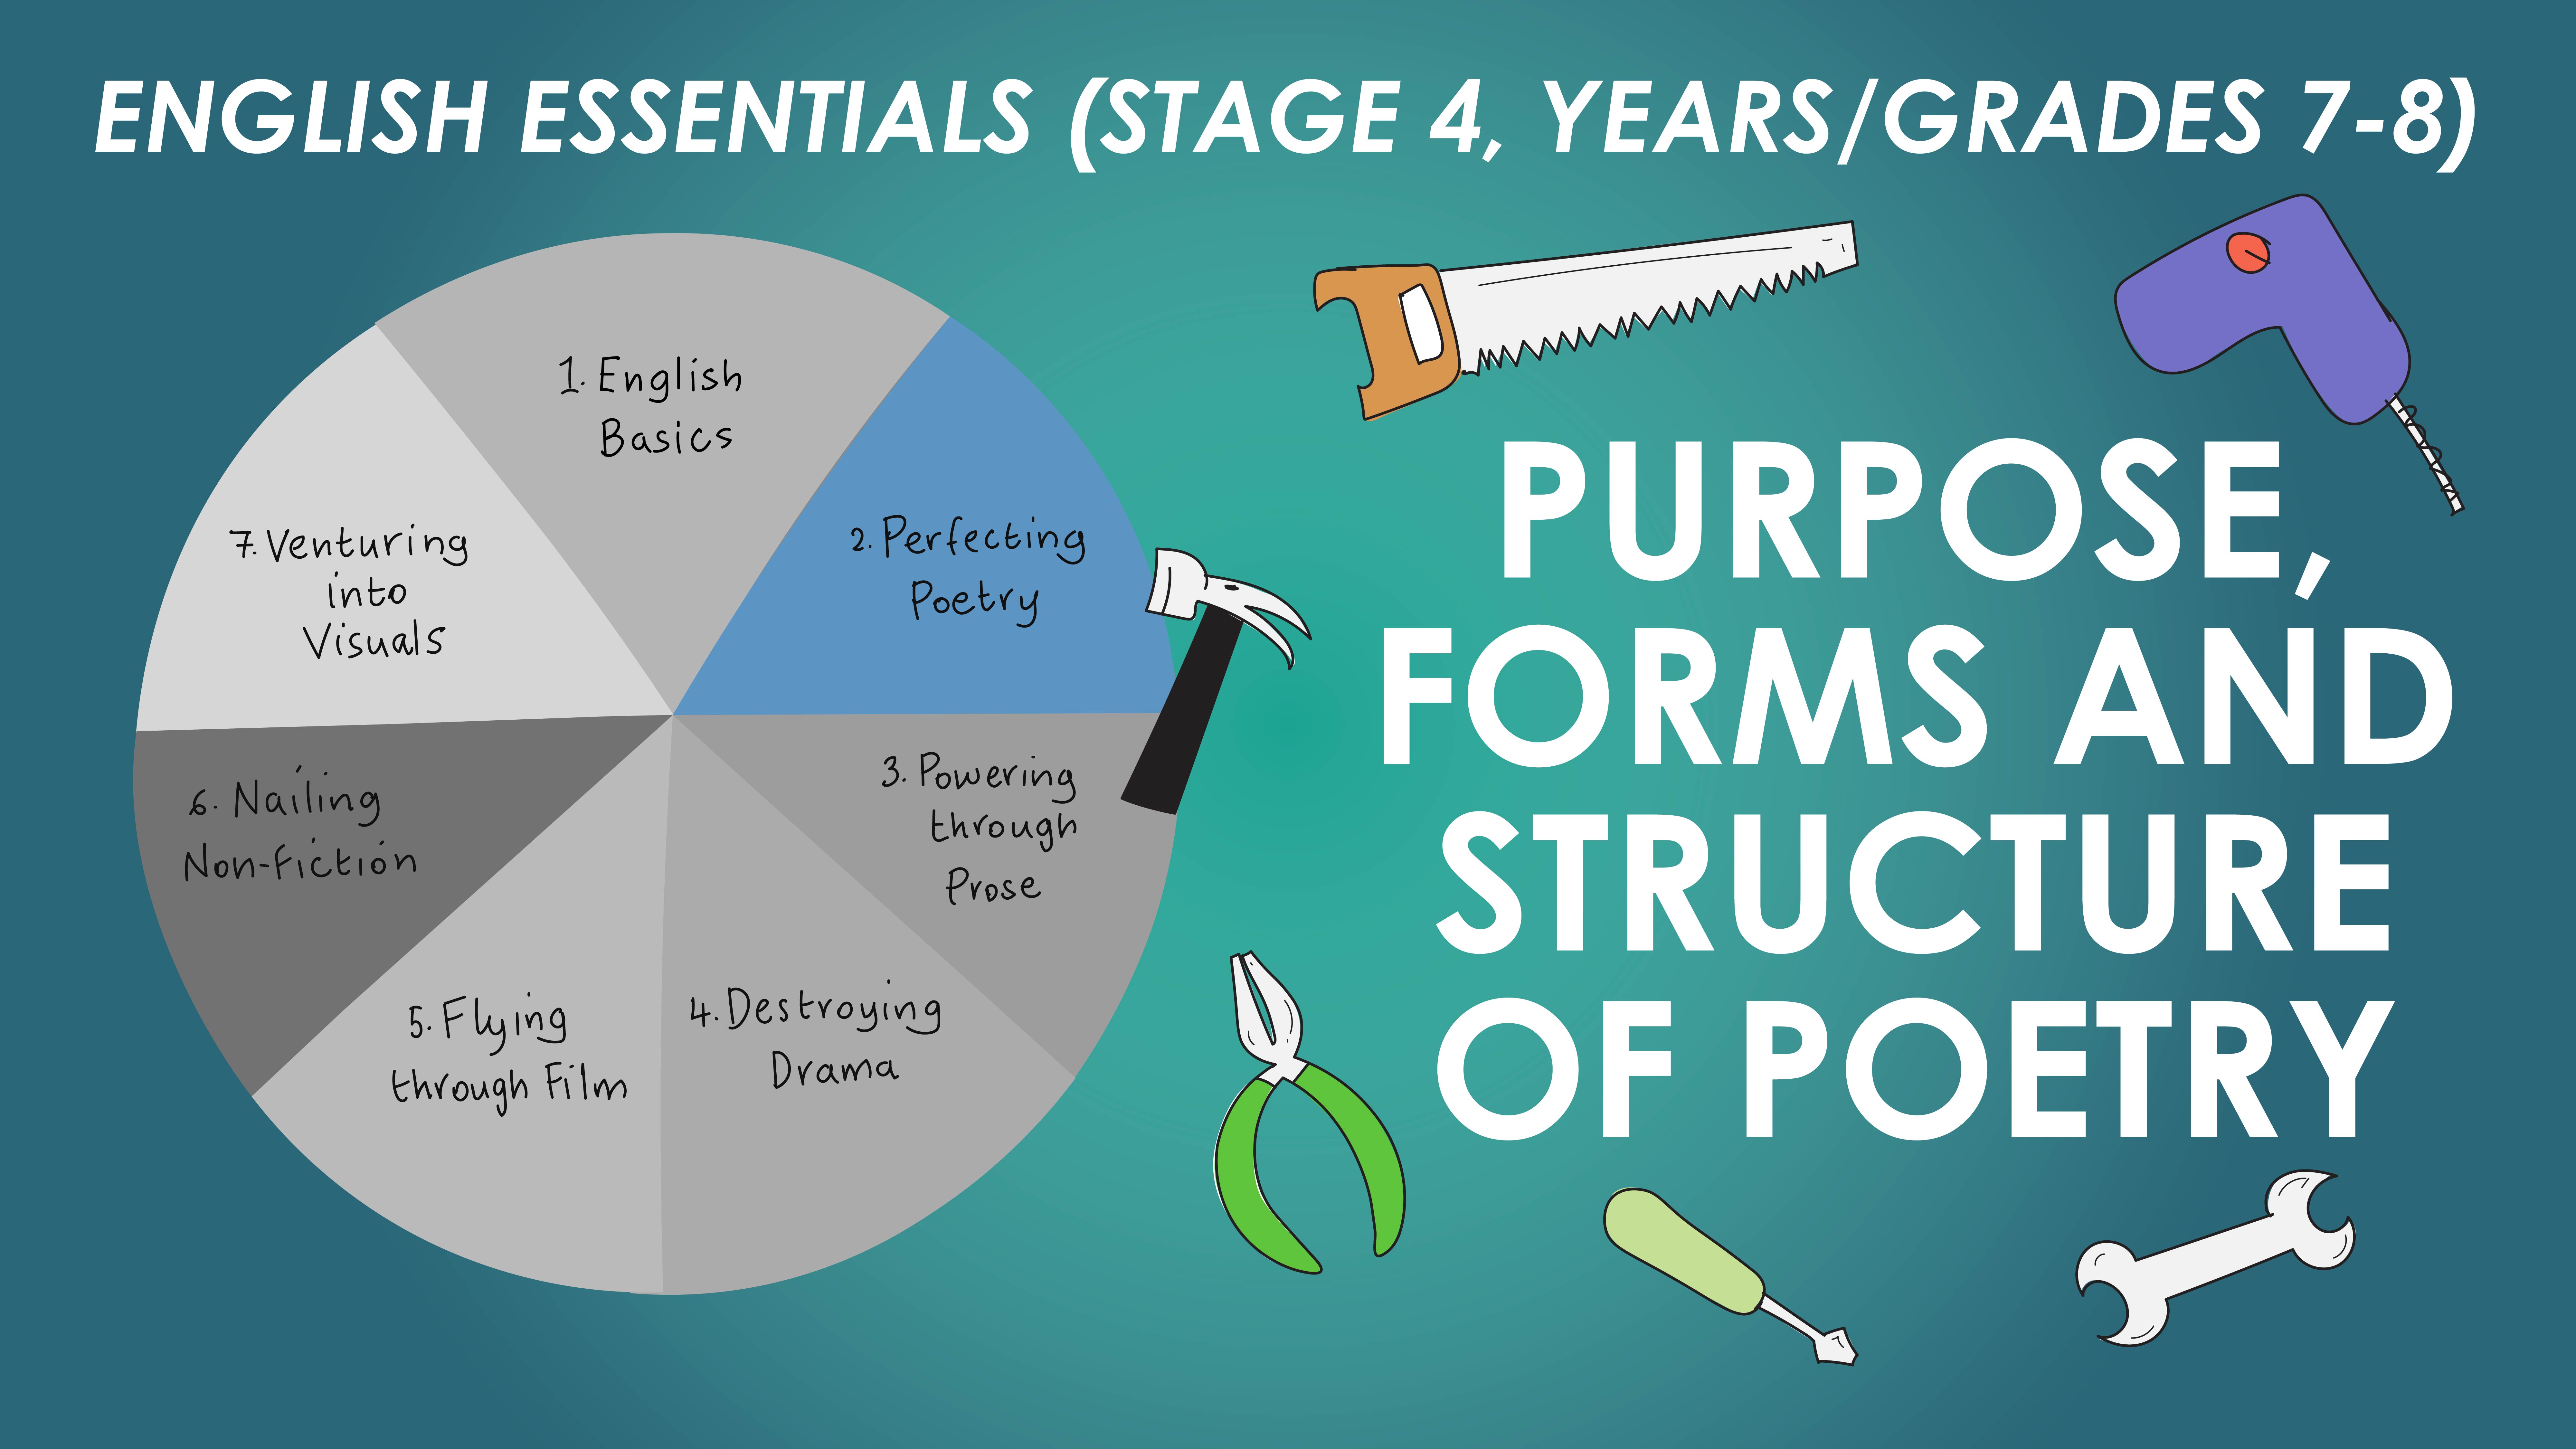 English Essentials – Perfecting Poetry – Purpose, Forms and Structure of Poetry (Stage 4, Years/Grades 7-8)